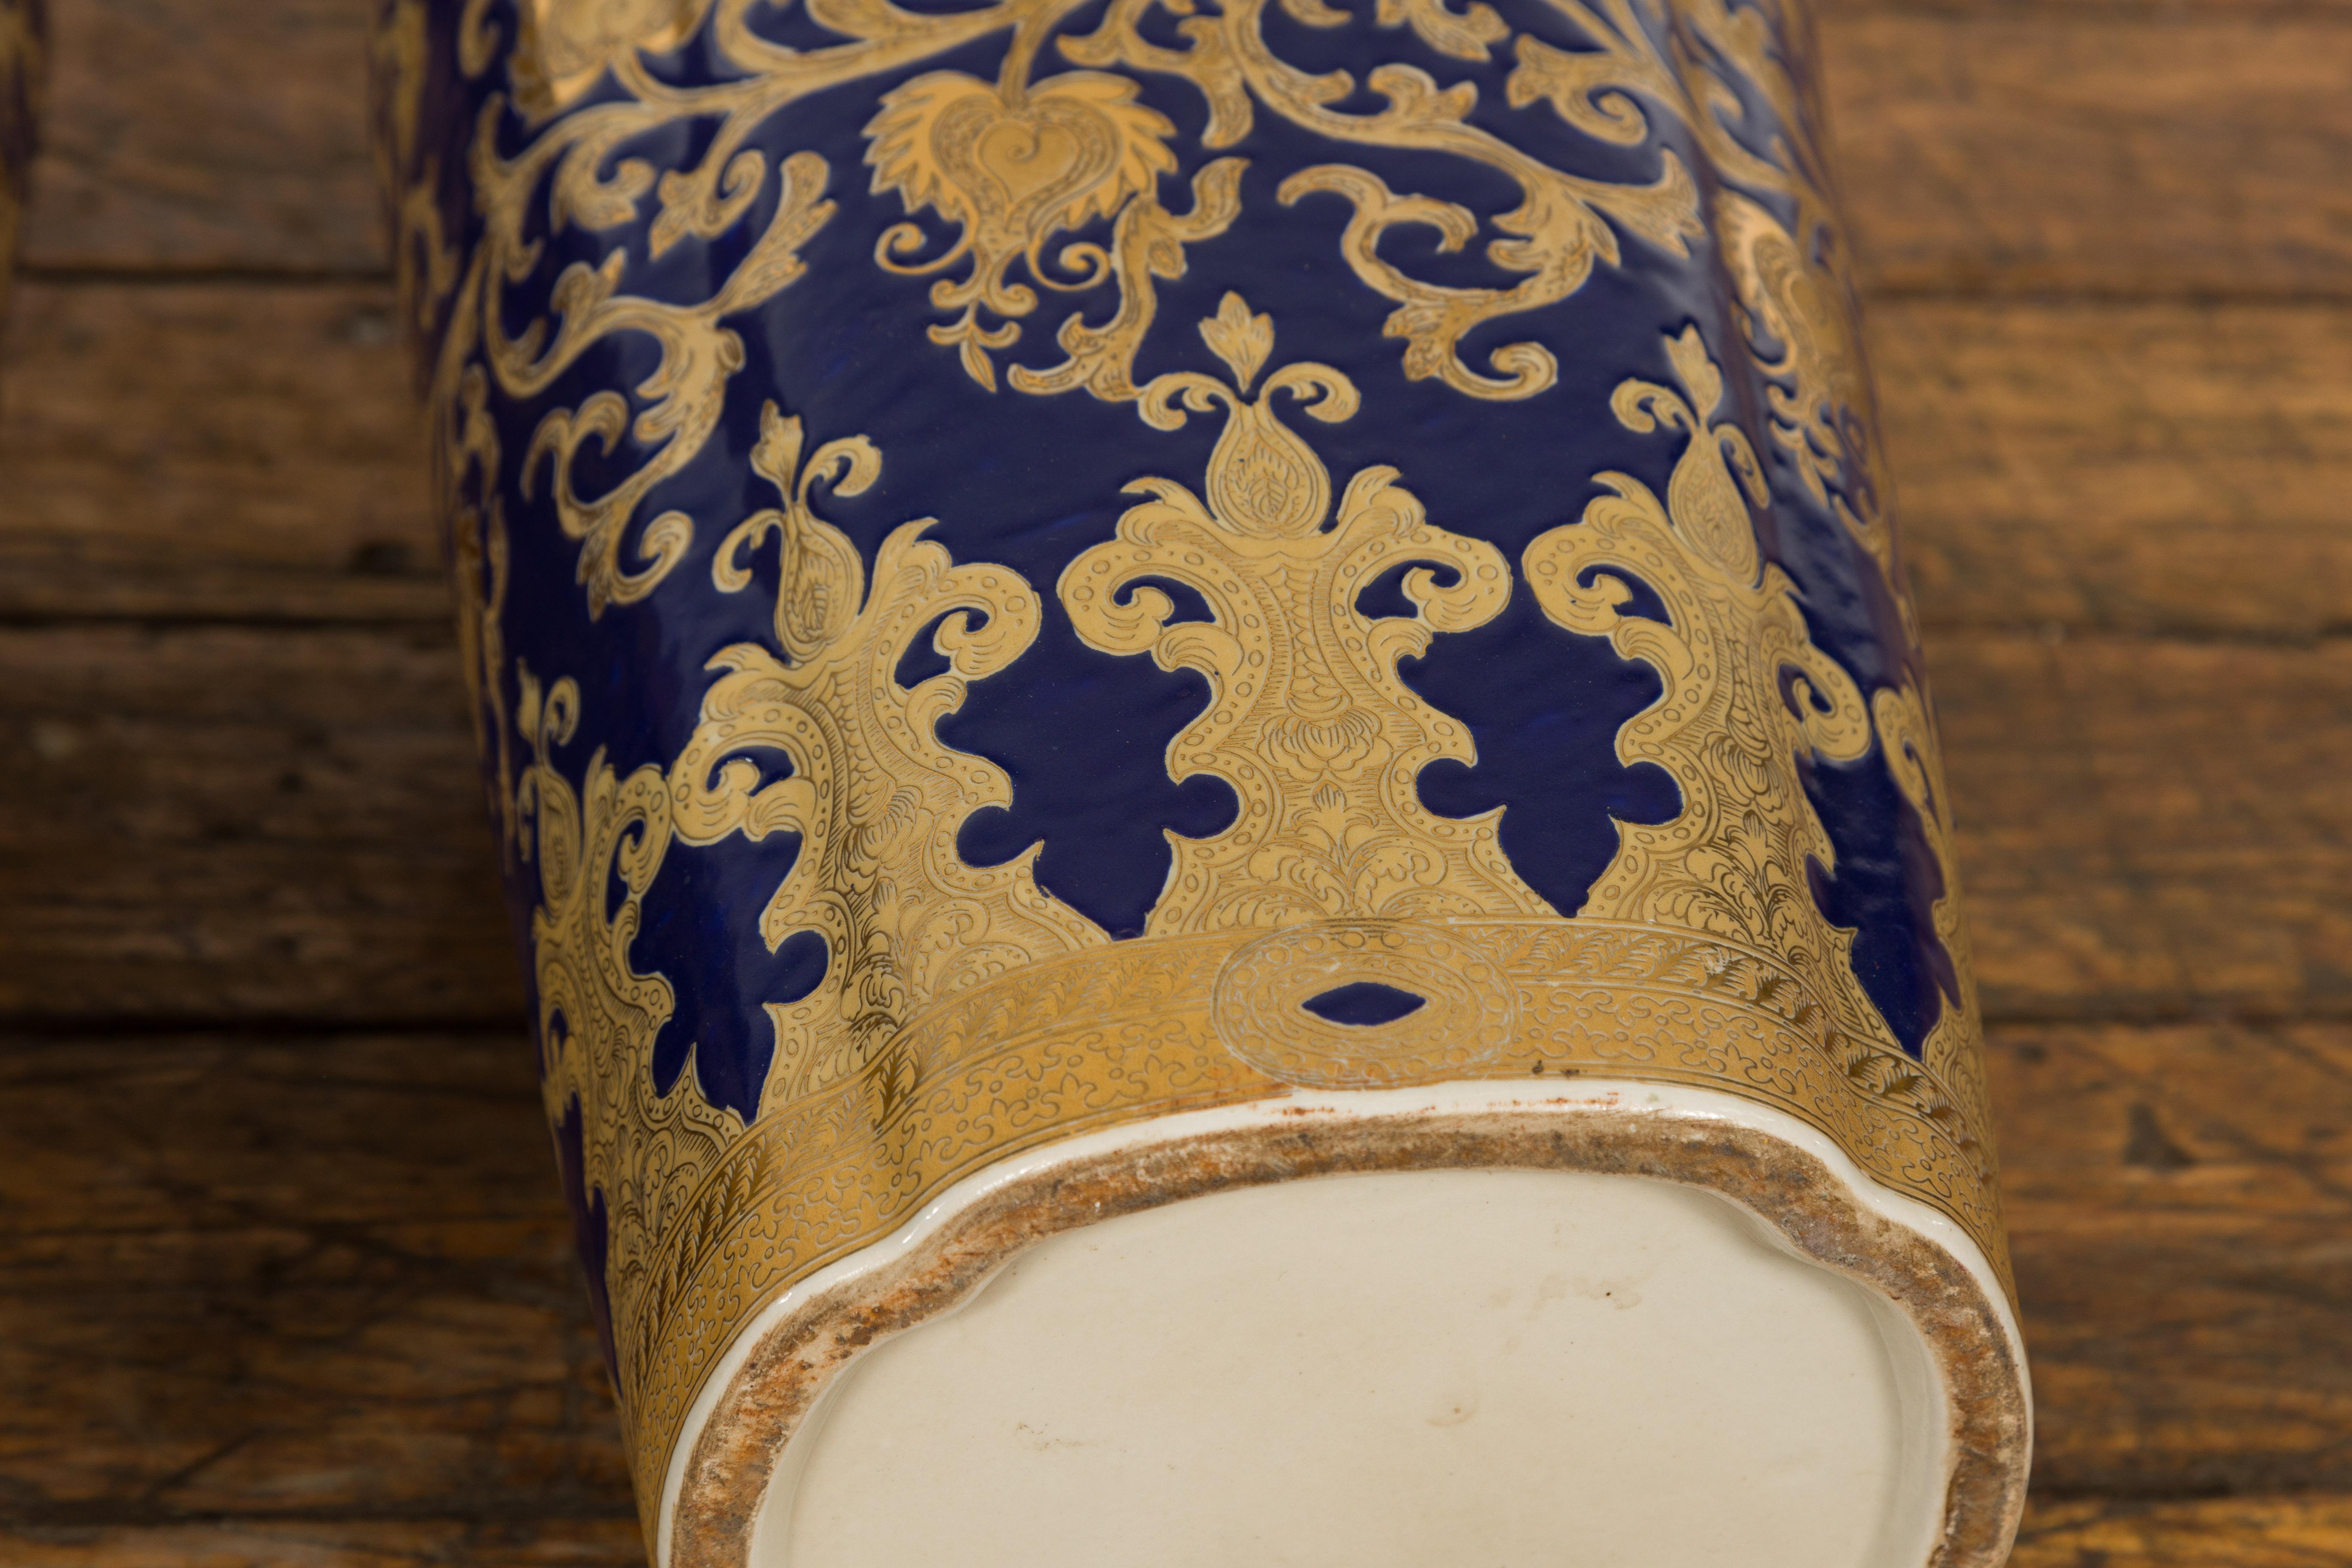 Pair of Dark Blue and Gold Vintage Vases with Intricate Design For Sale 11